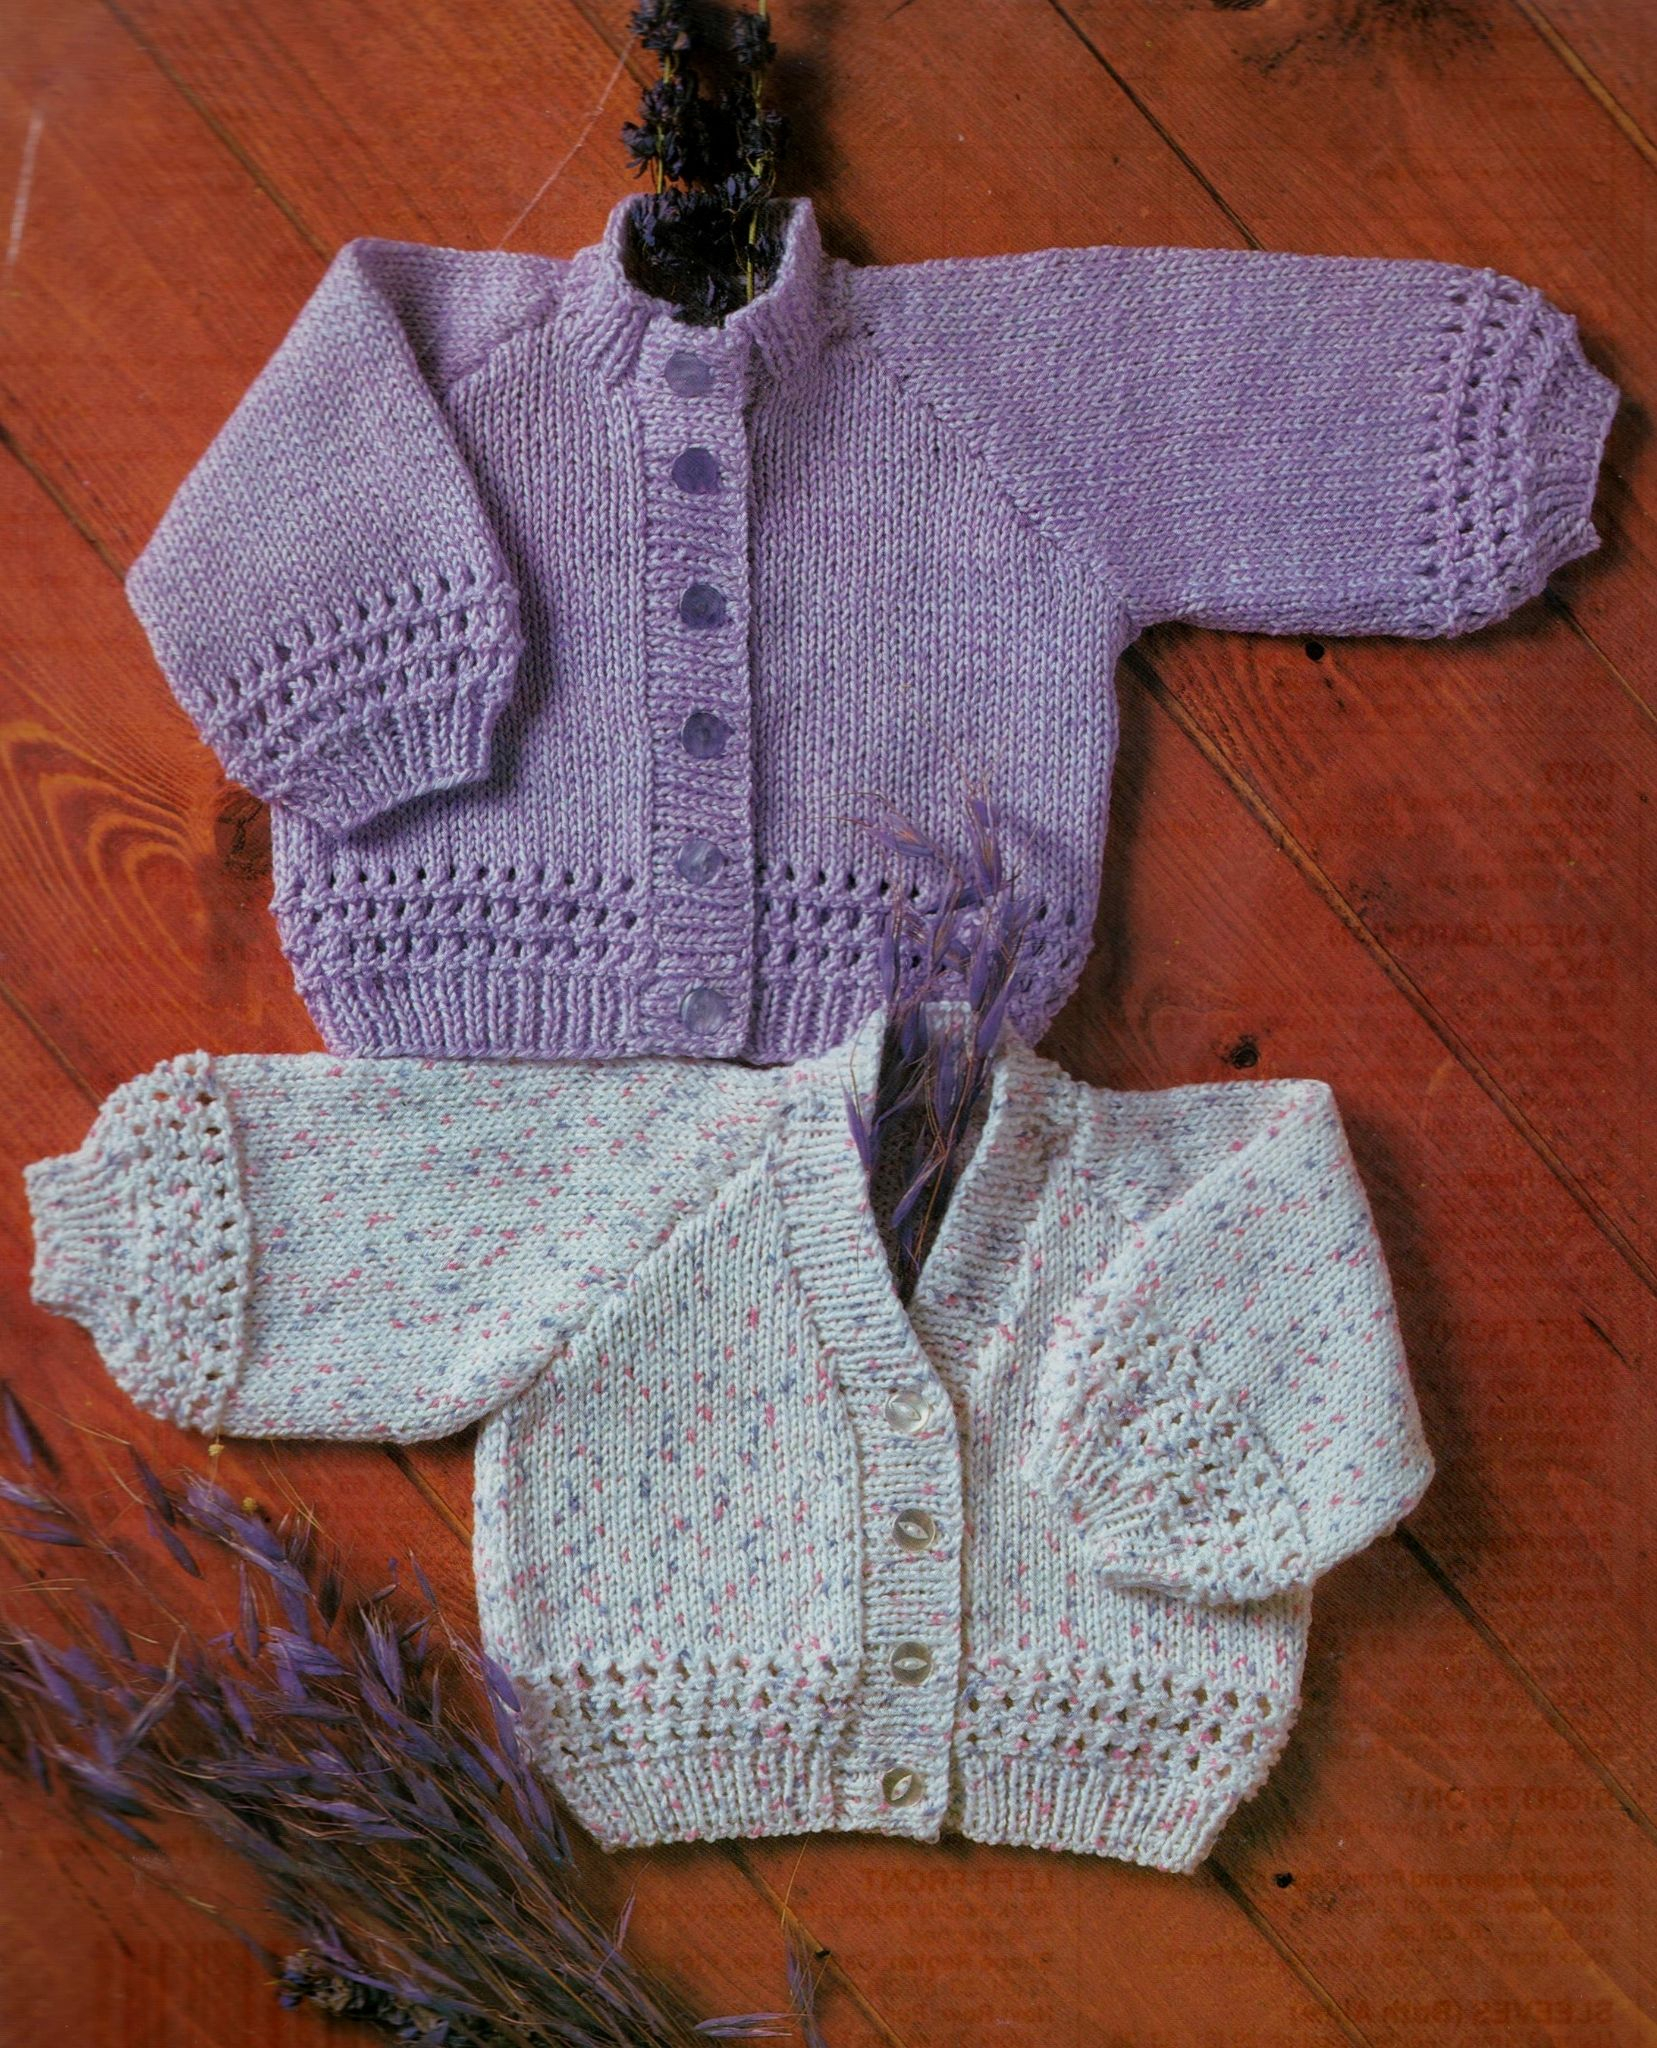 Knitting Patterns Download Pdf Digital Download Ba Knitting Pattern Ba Cardigan With 2 Necklines In Double Knitting Chest 14 To 22